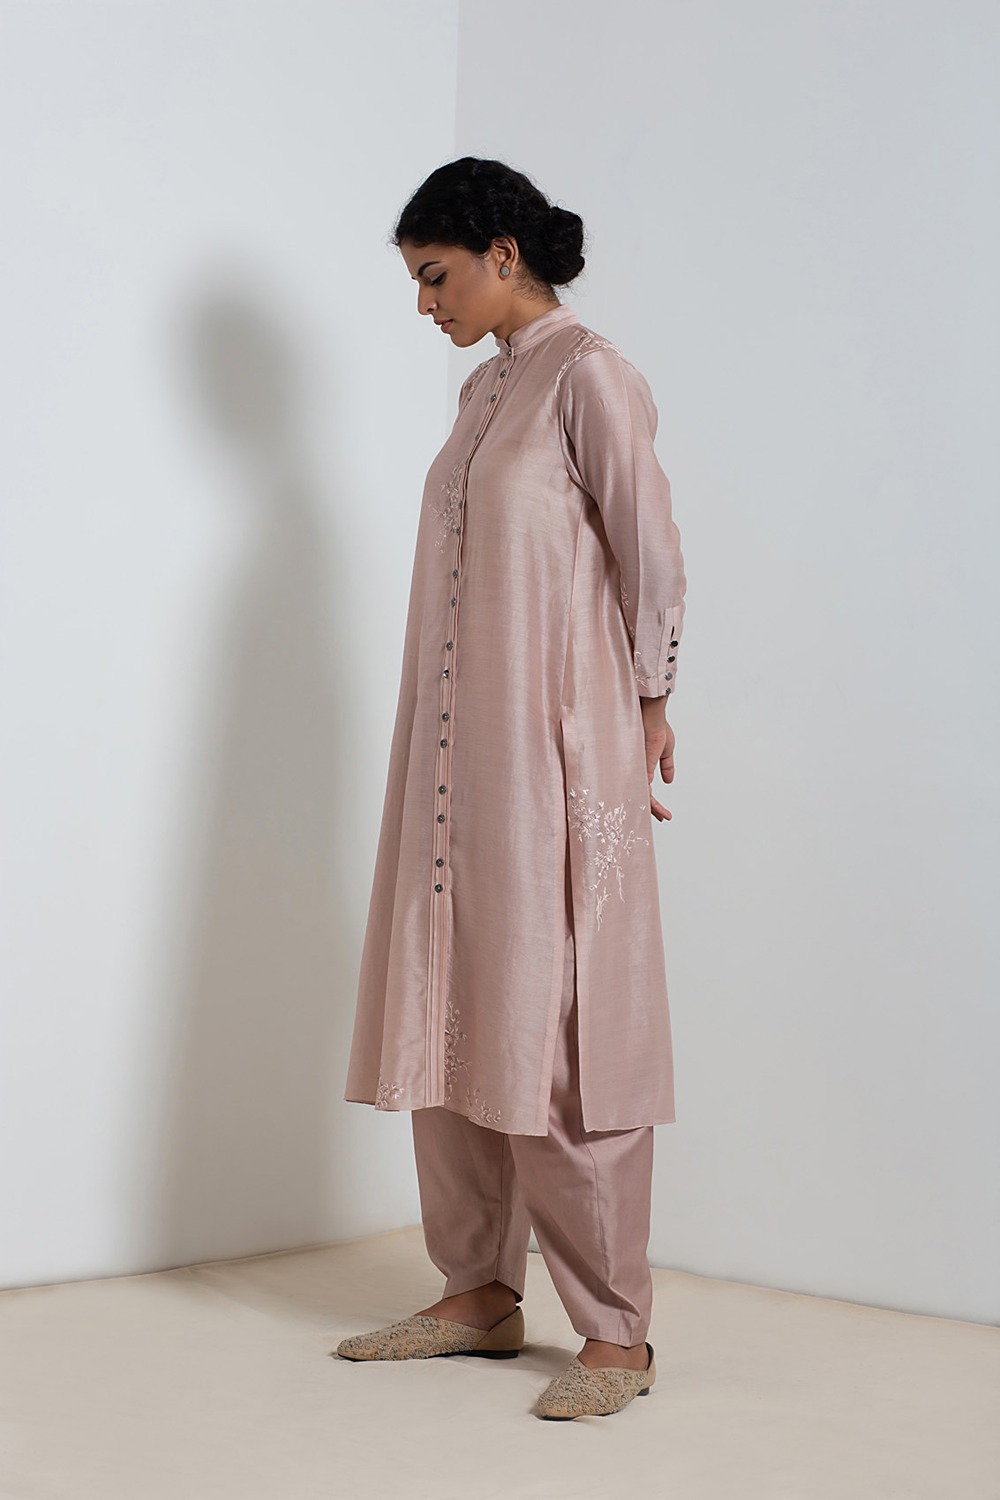 Opal Miniature Rose Bunches Embroidered Kurta